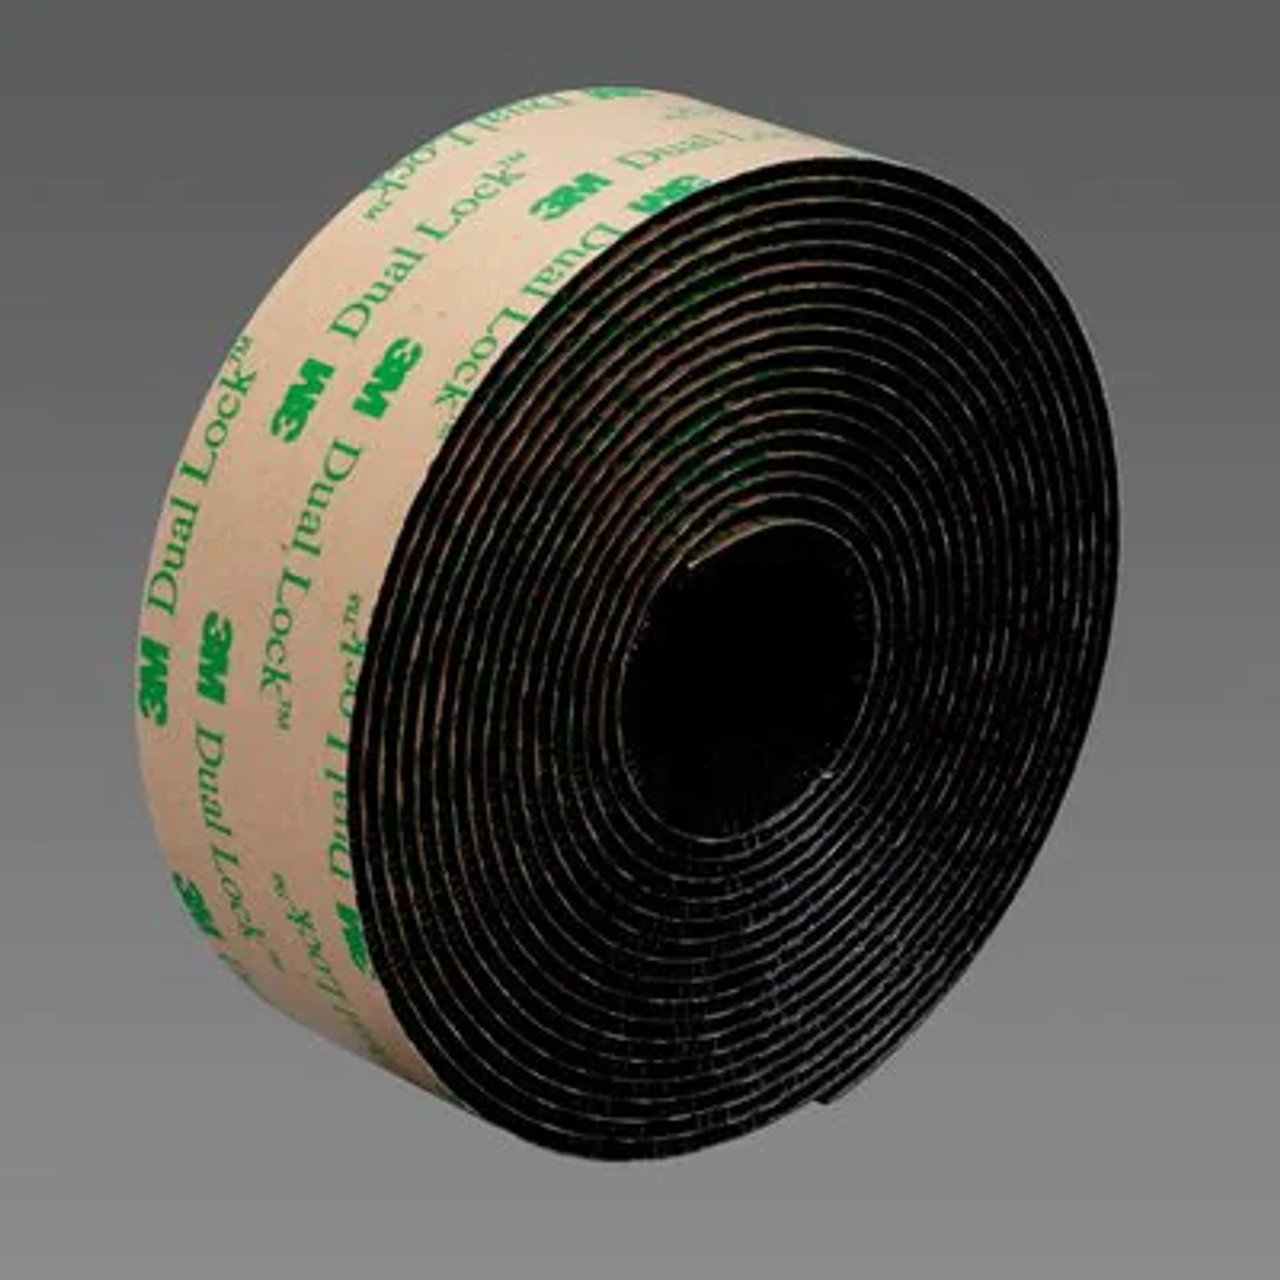 3M Dual Lock Reclosable Fastener TB3550CF, 1 in x 10 ft, Type 250/250, 1  Mated Strip/bag, 8 bags/case Industrial 3M Products & Supplies